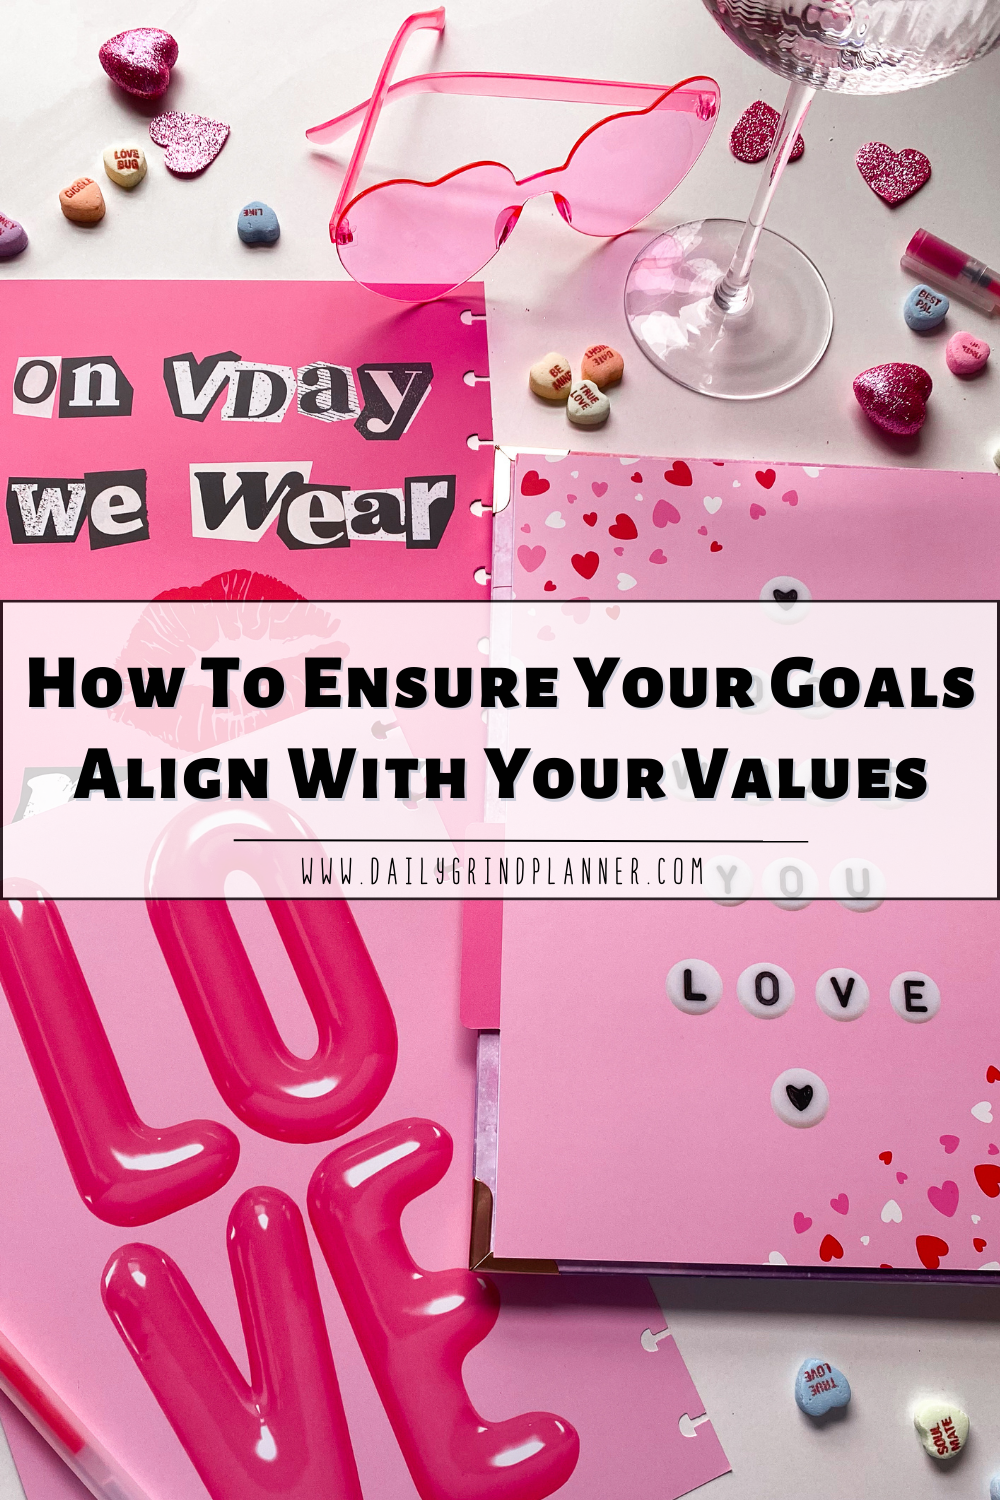 How to Ensure Your Goals Align With Your Values